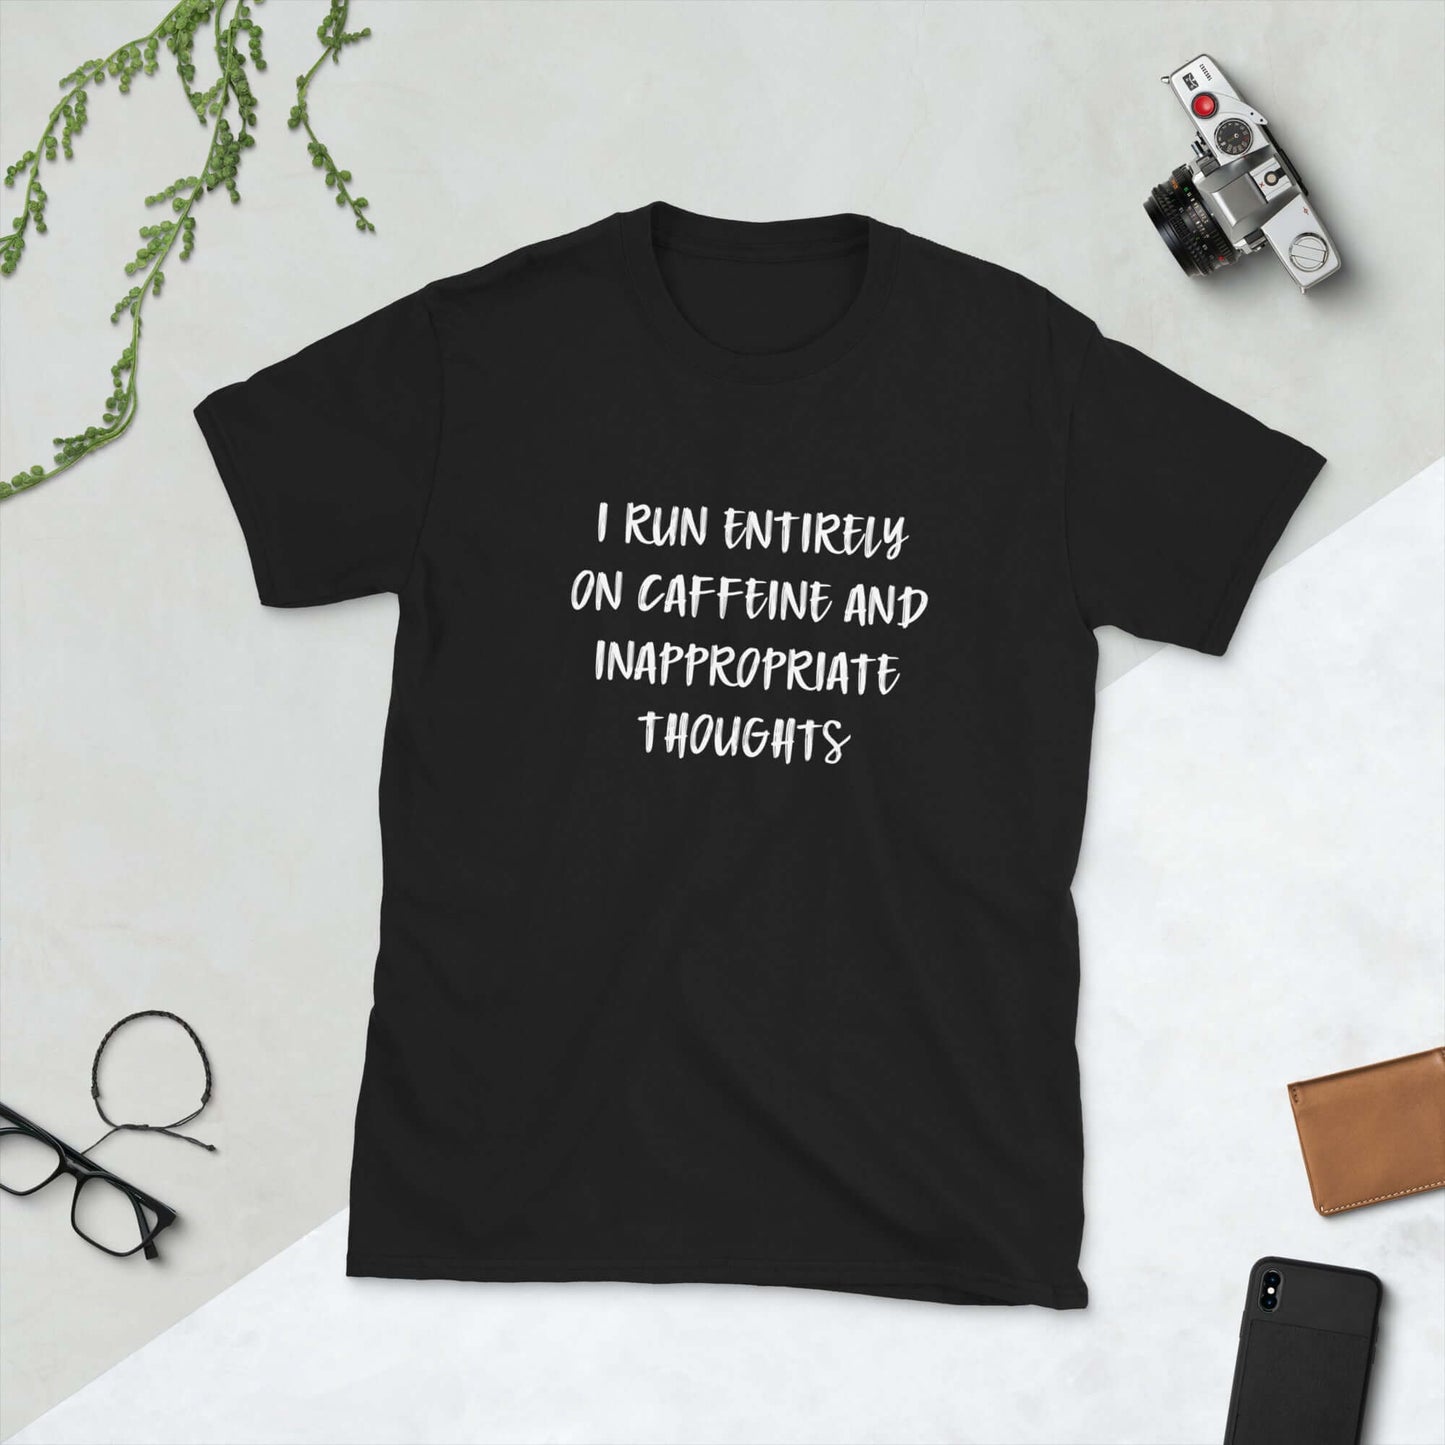 Black t-shirt with the words I run entirely on caffeine & inappropriate thoughts printed on the front.